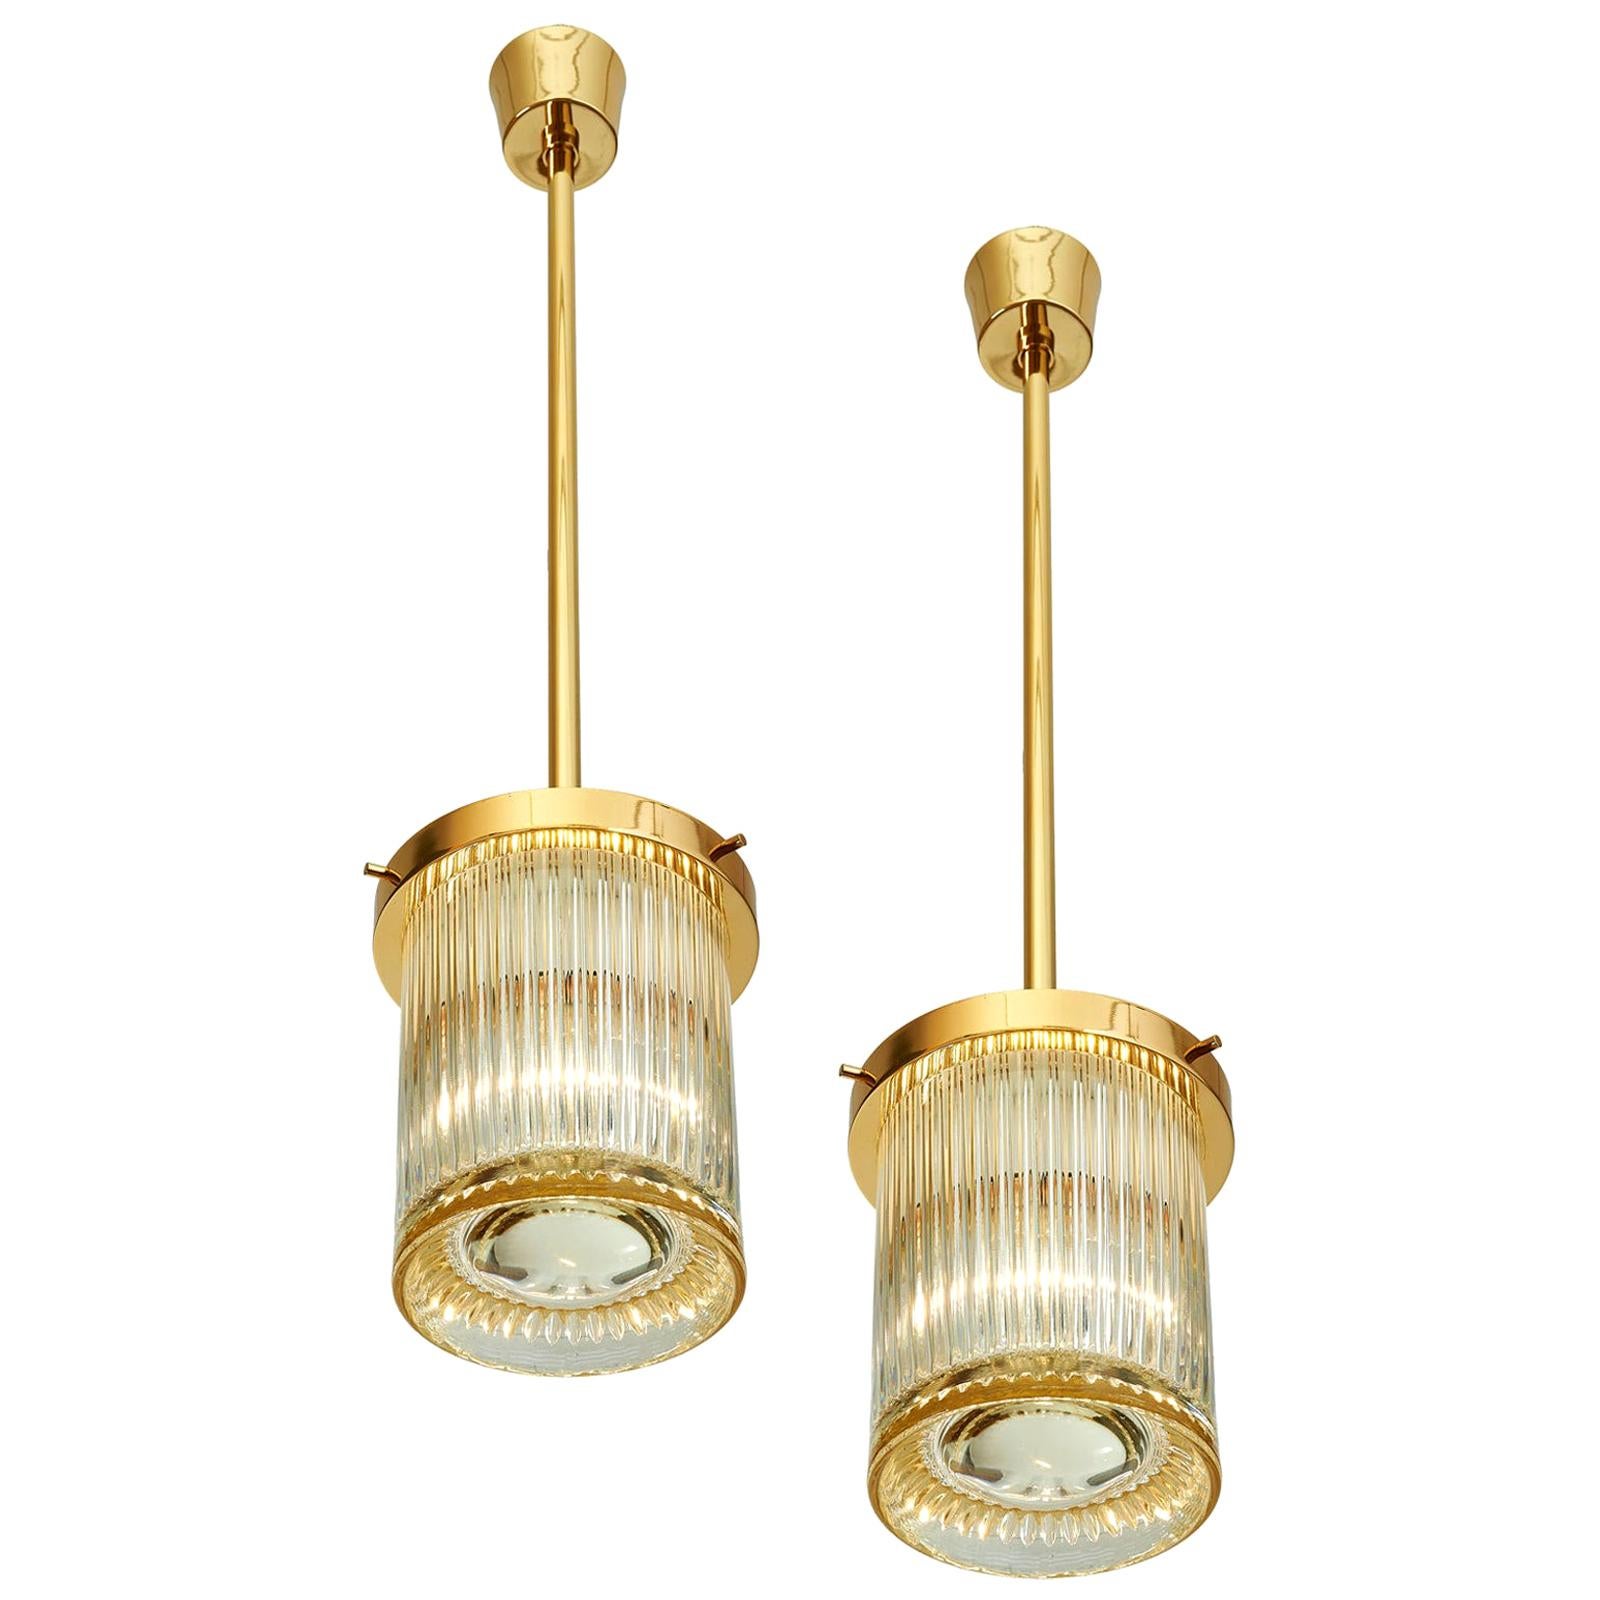 Pair of Gold Toned Ribbed Glass Lanterns